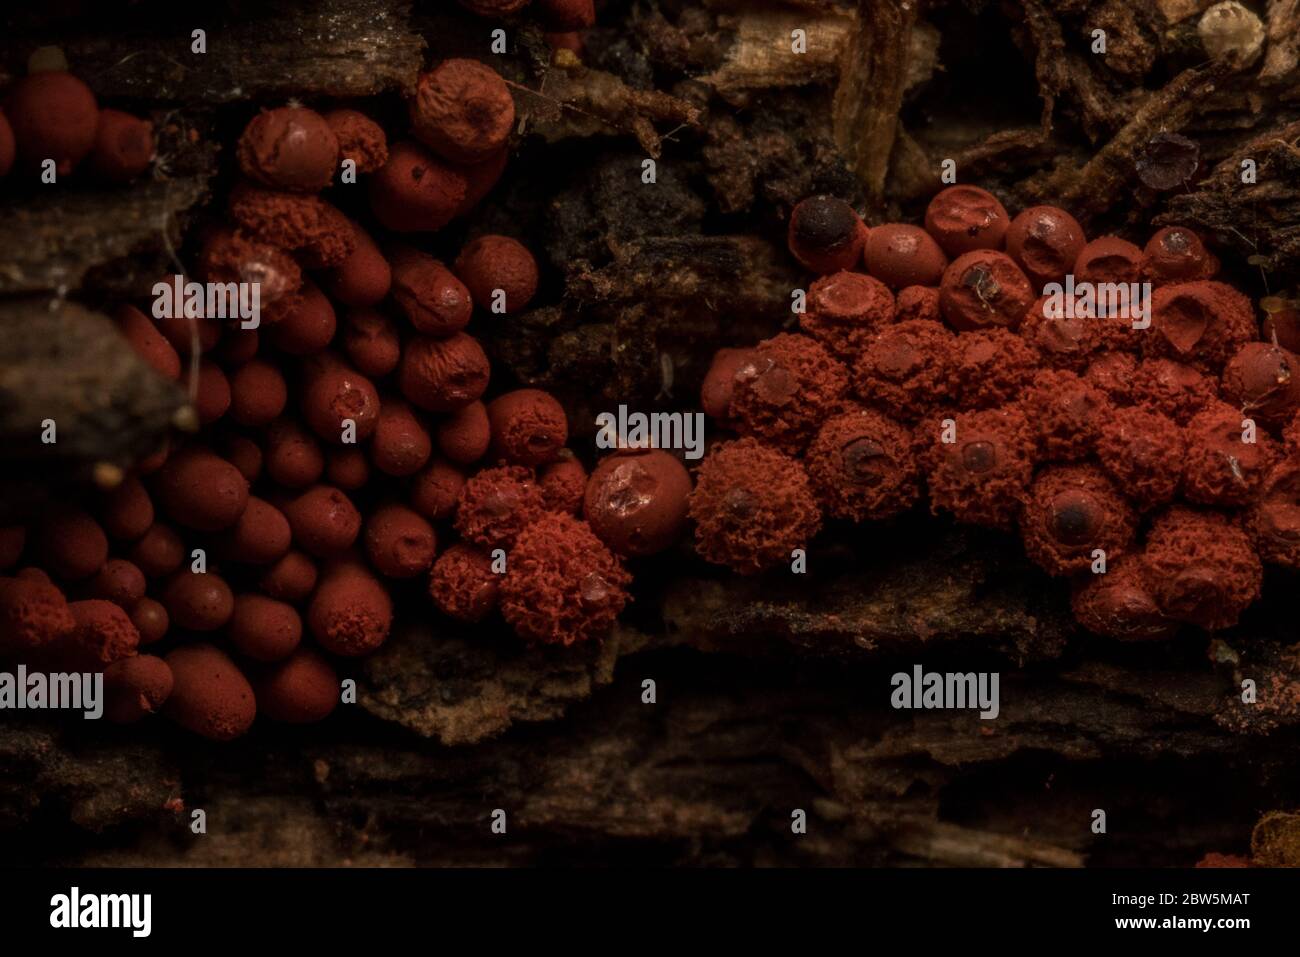 The carnival candy slime mold (Arcyria denudata) is a brightly colored slime mold with a panglobal distribution. Stock Photo